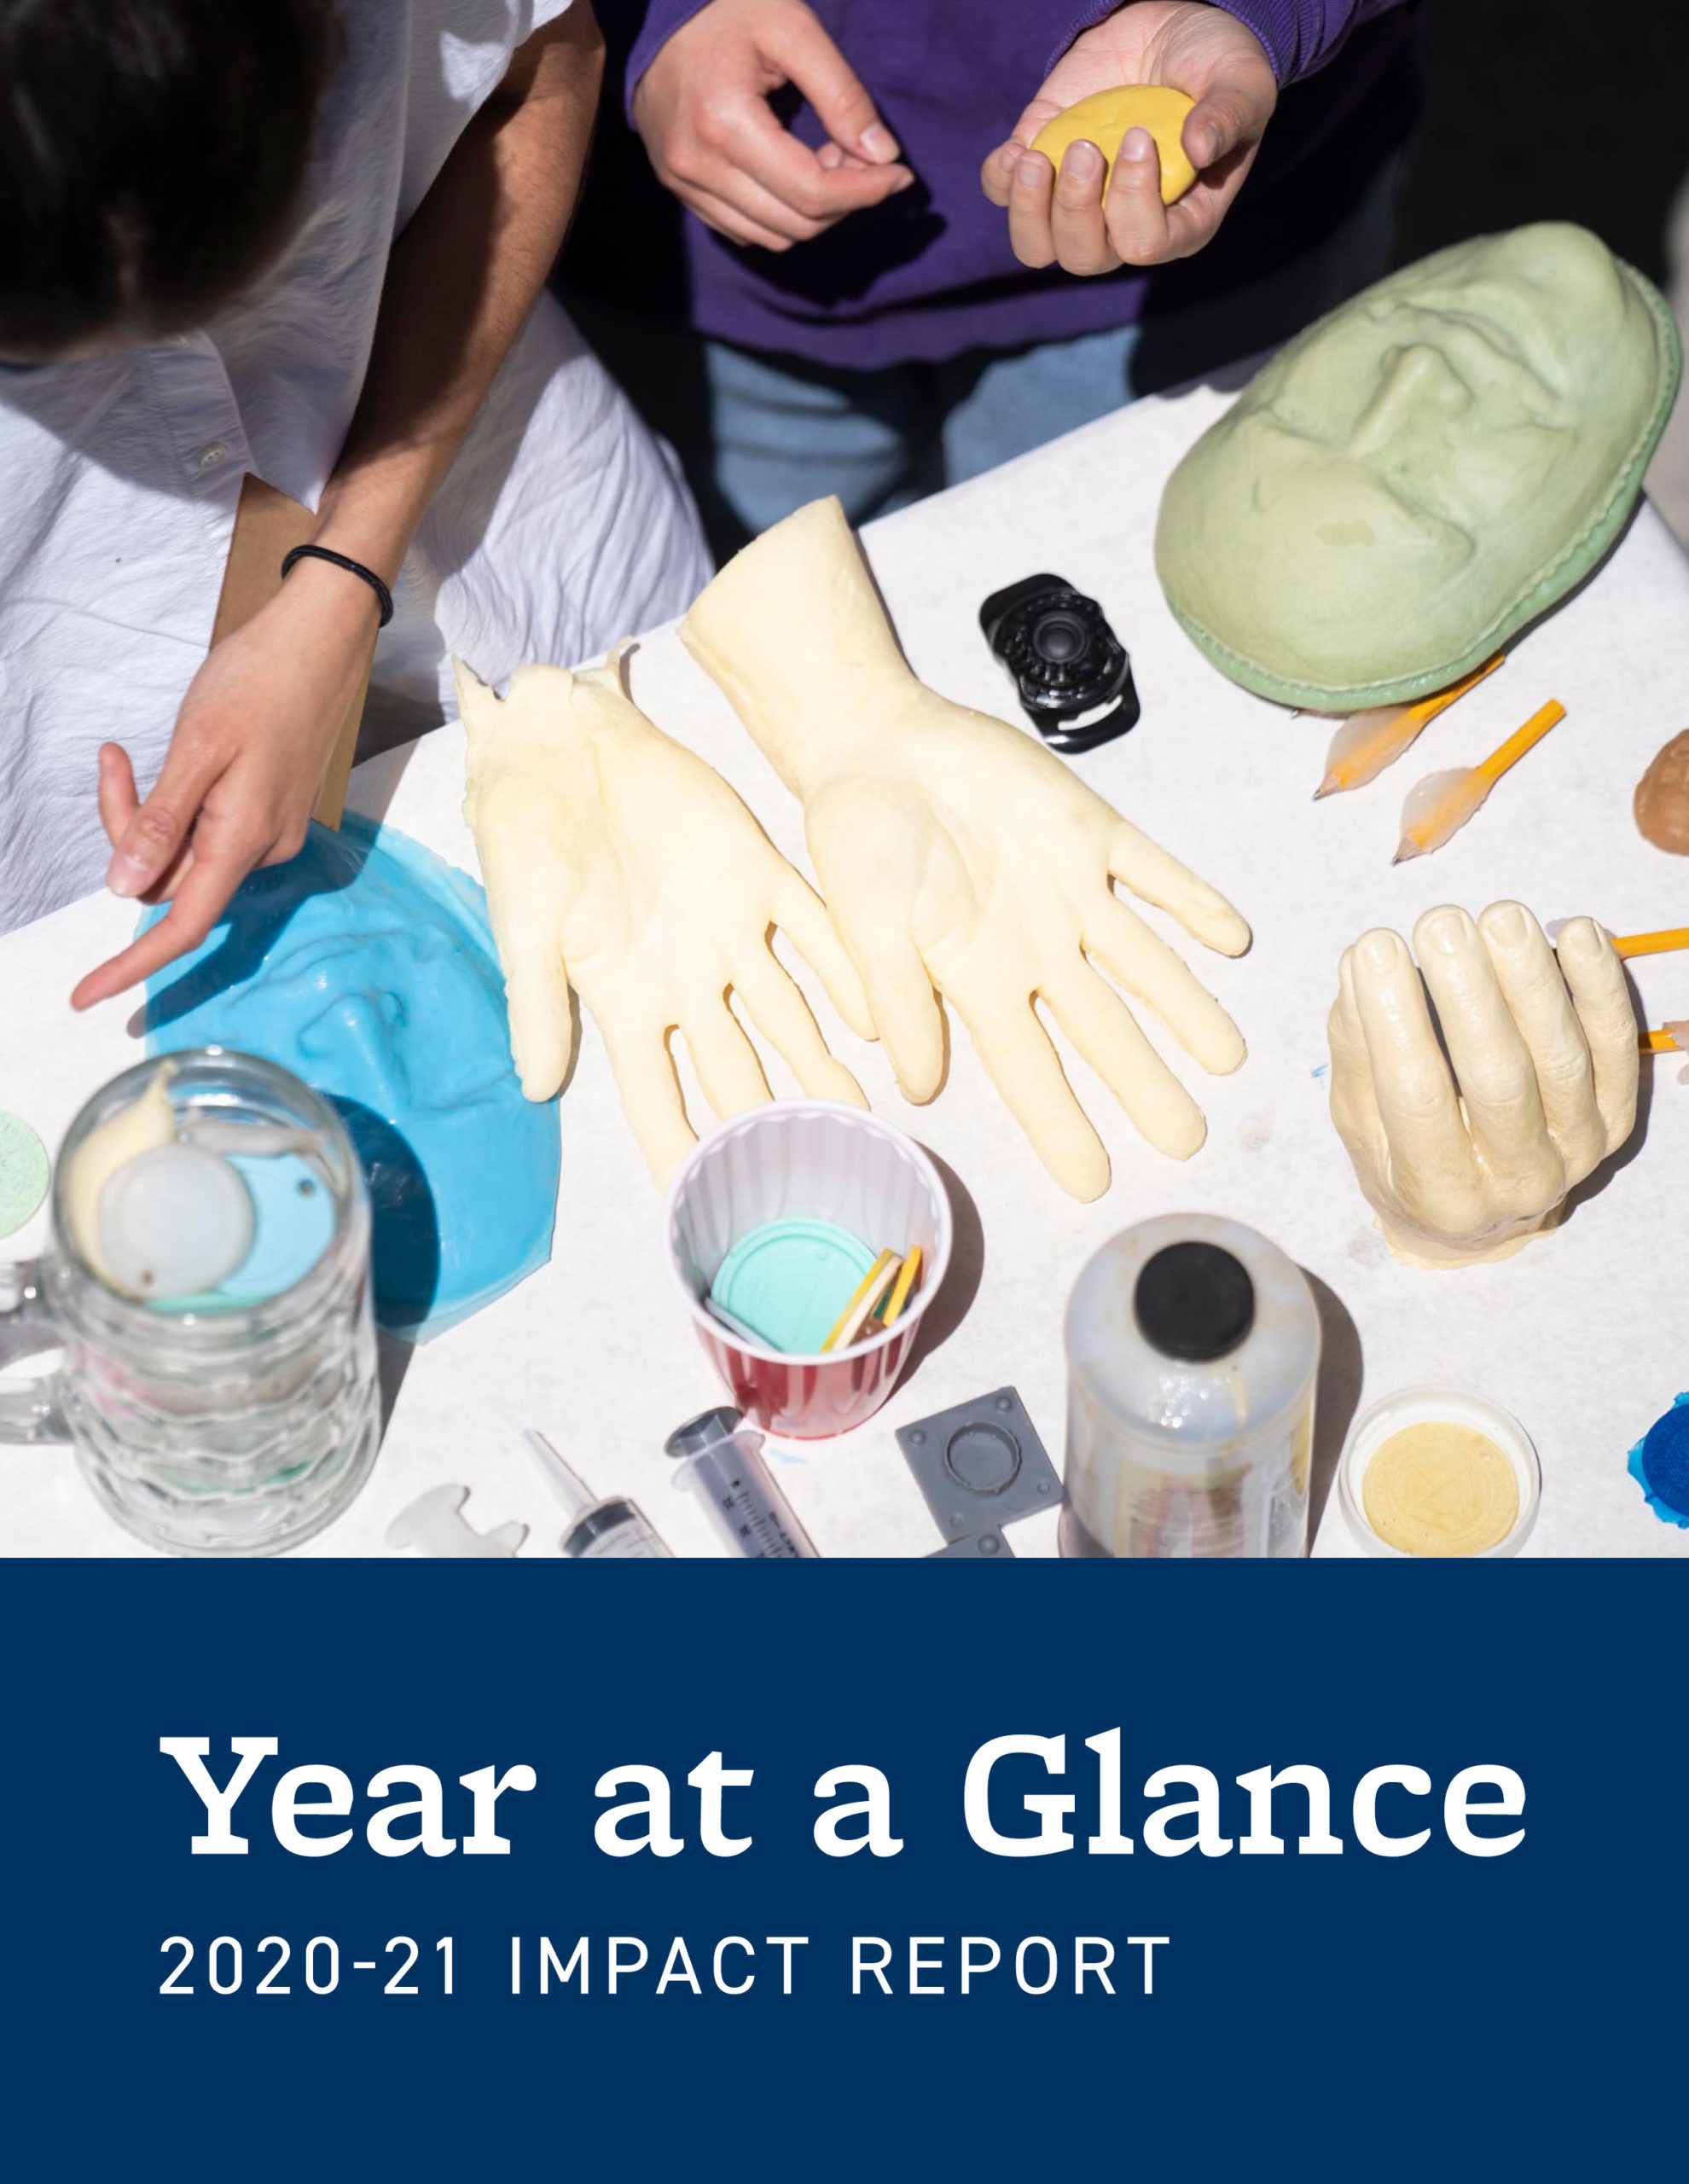 Year at a Glance 2020-21 Impact Report